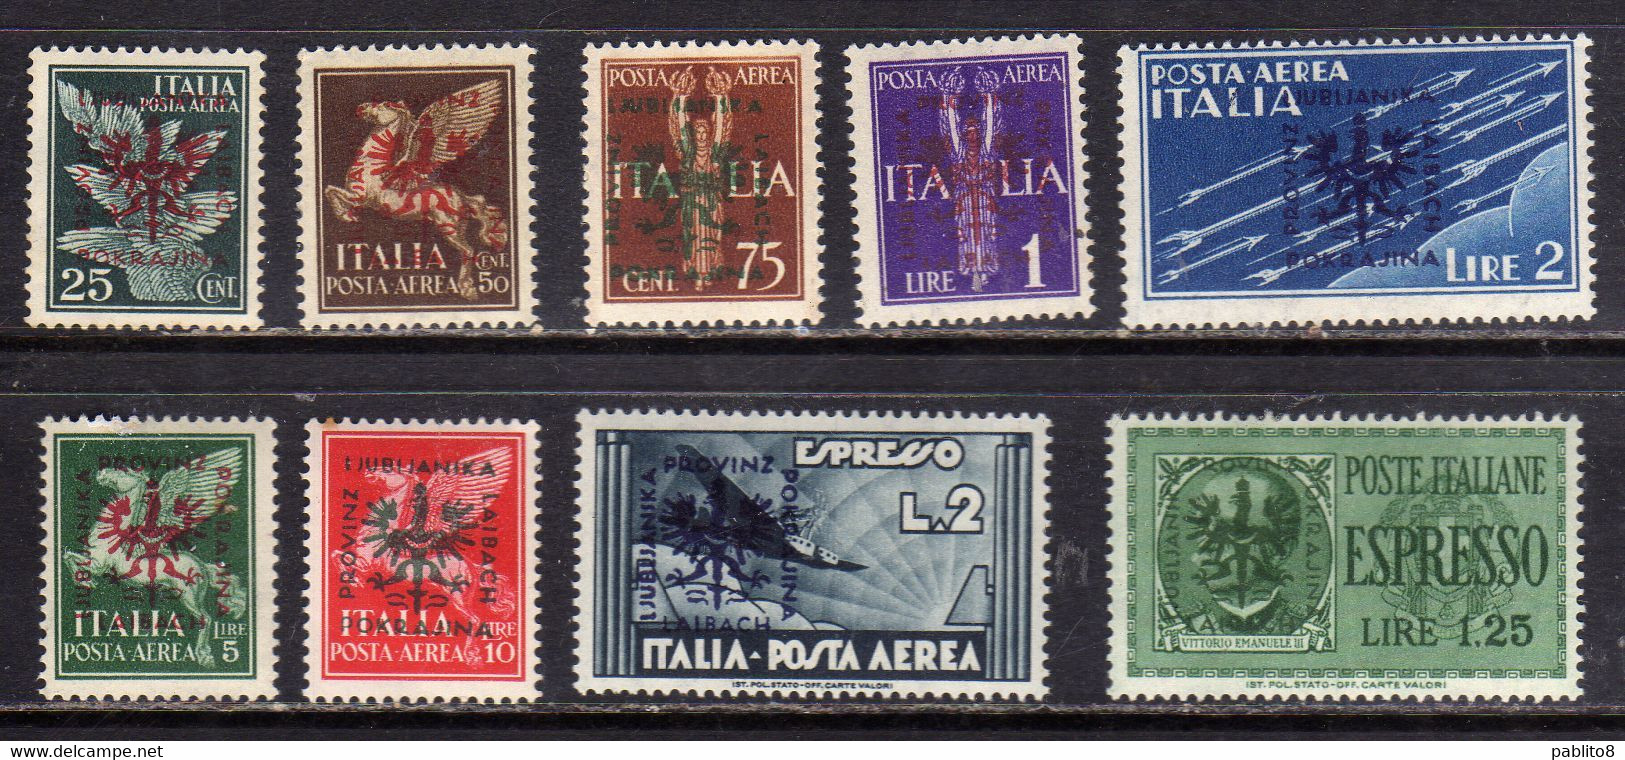 LUBIANA 1944 OCCUPAZIONE TEDESCA GERMAN OCCUPATION POSTA AEREA AIR MAIL SERIE COMPLETA COMPLETE SET MNH - Lubiana